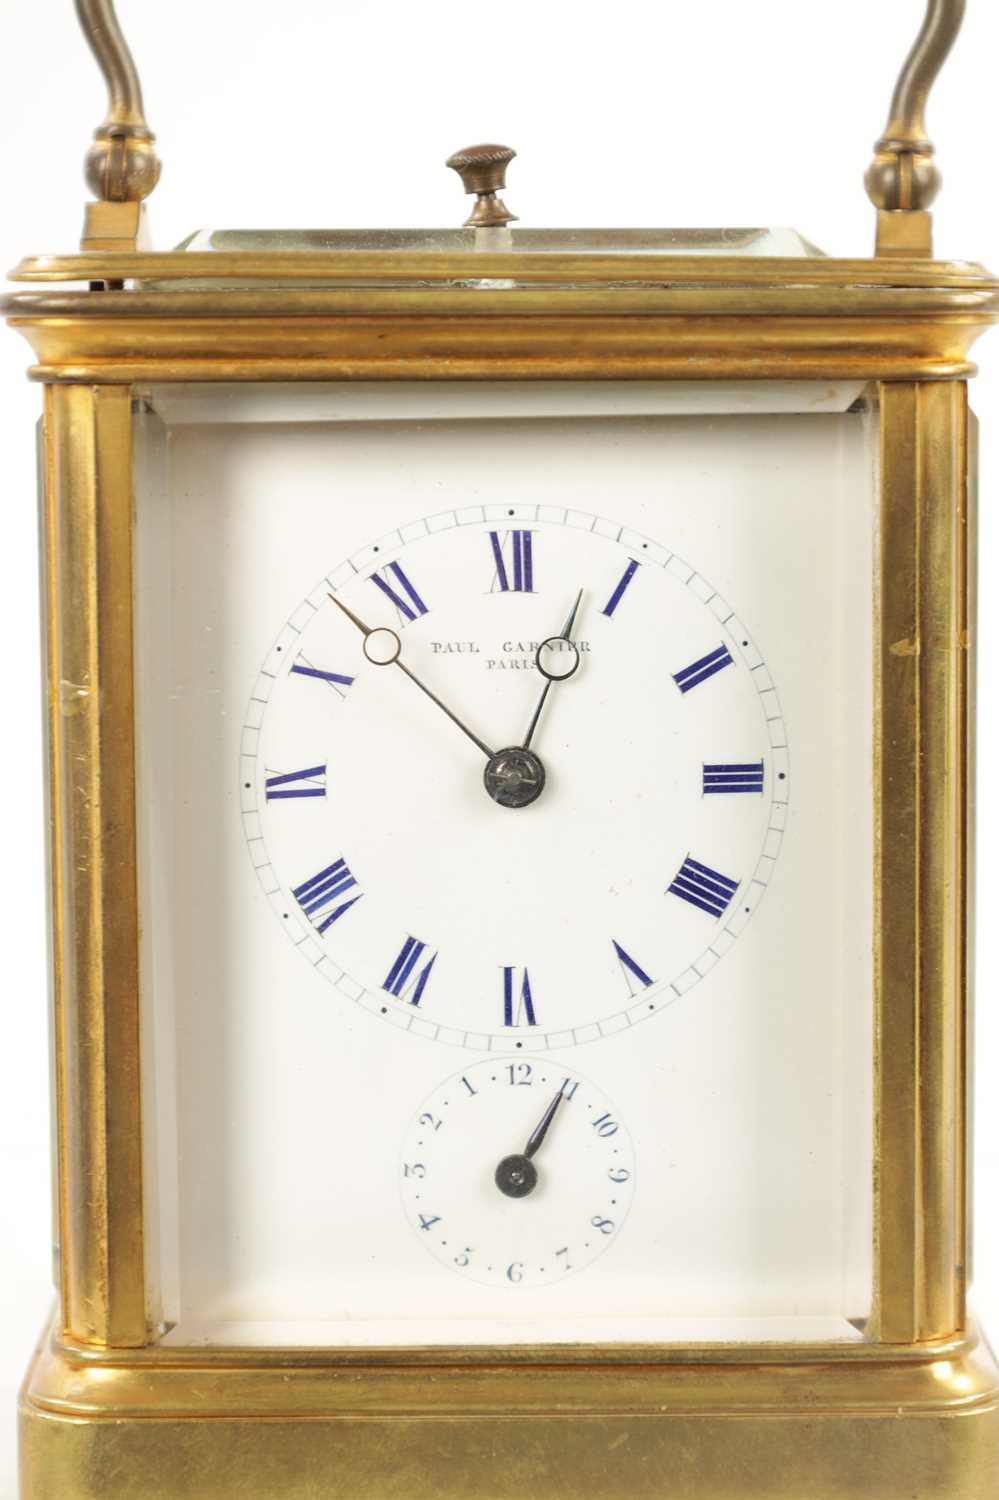 PAUL GARNIER, PARIS. A 19TH CENTURY FRENCH REPEATING CARRIAGE CLOCK - Image 2 of 9